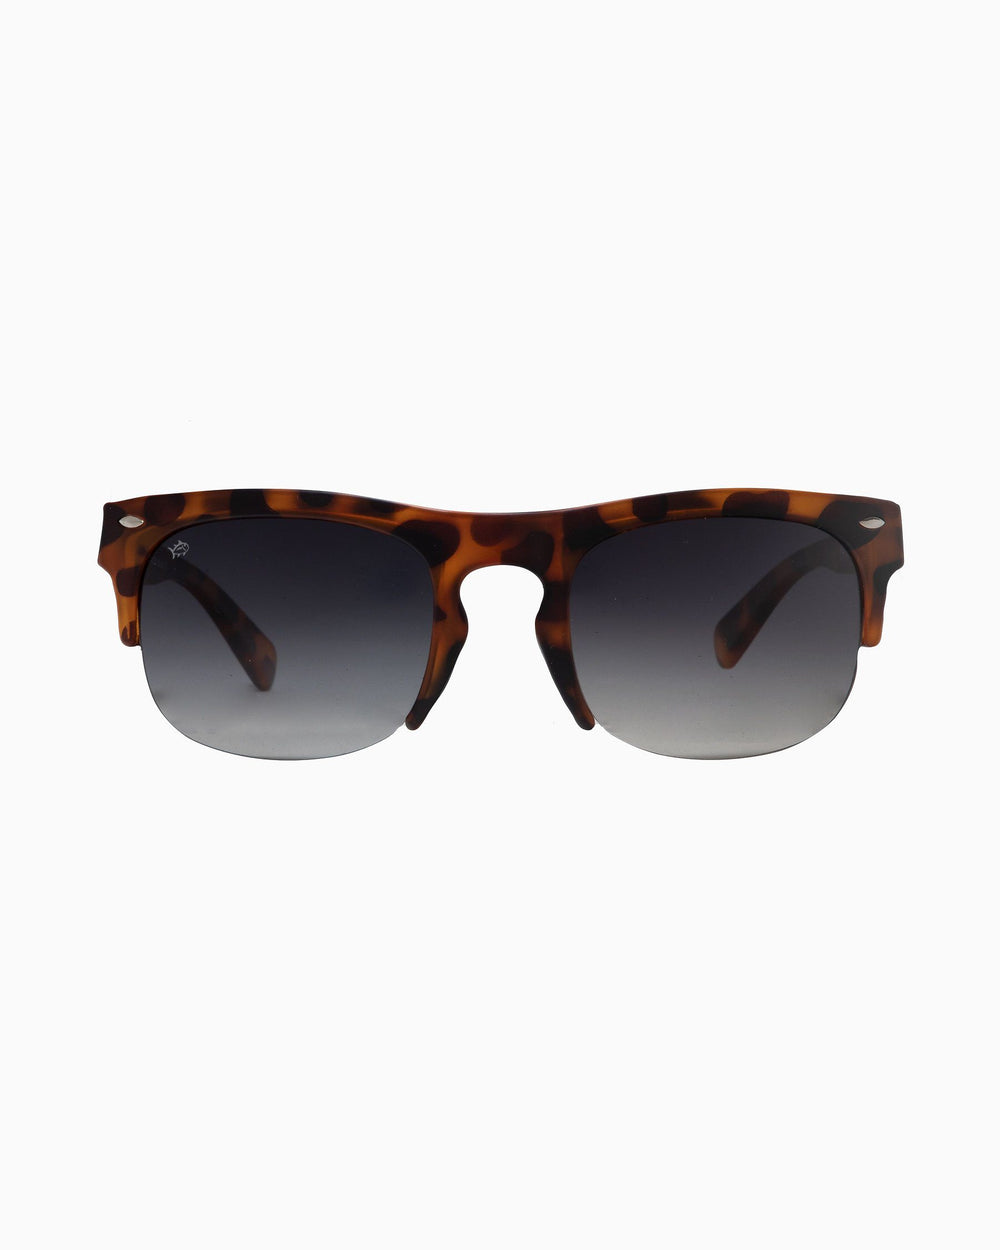 The front of the Men's Rheos Sullivans Sunglasses by Southern Tide - Tortoise Gunmetal